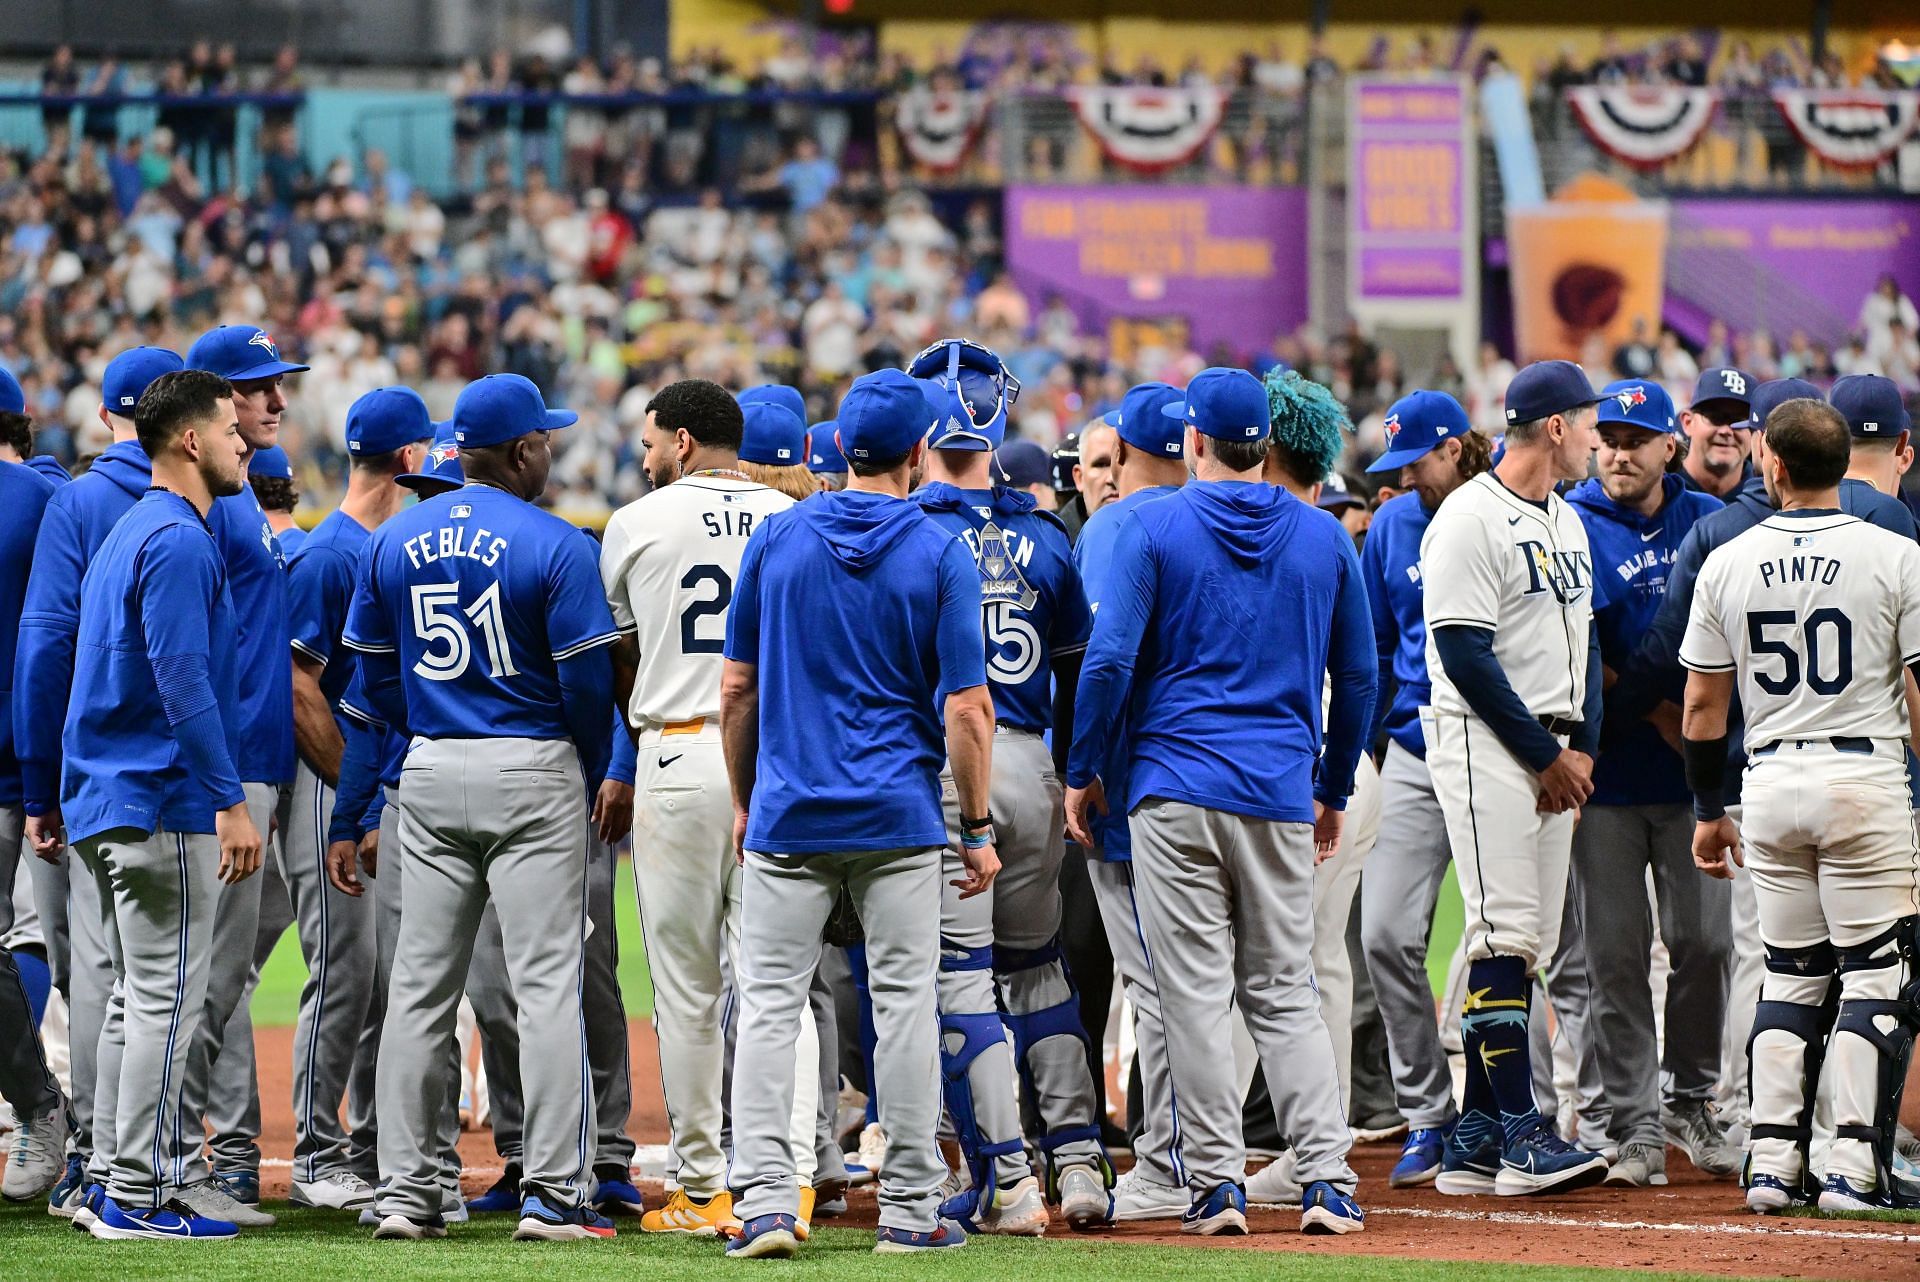 Benches cleared after the Genesis Cabrera shove